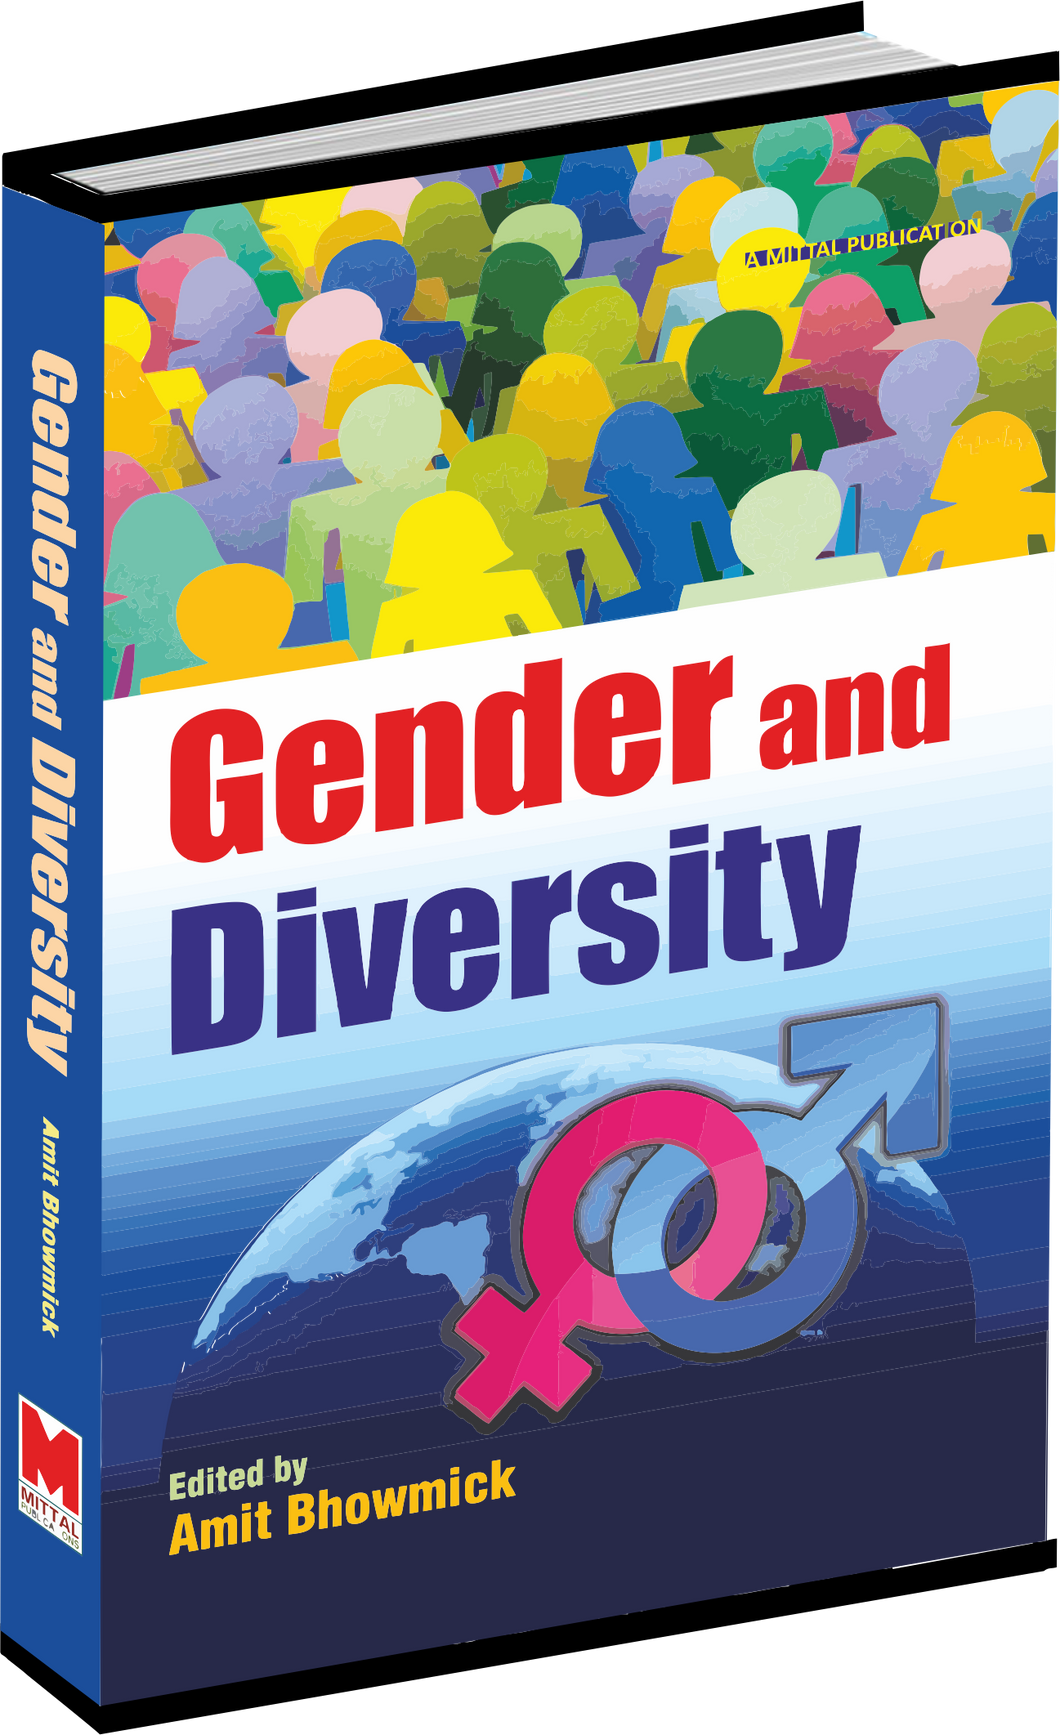 Gender and Diversity by Dr. Amit Bhowmick